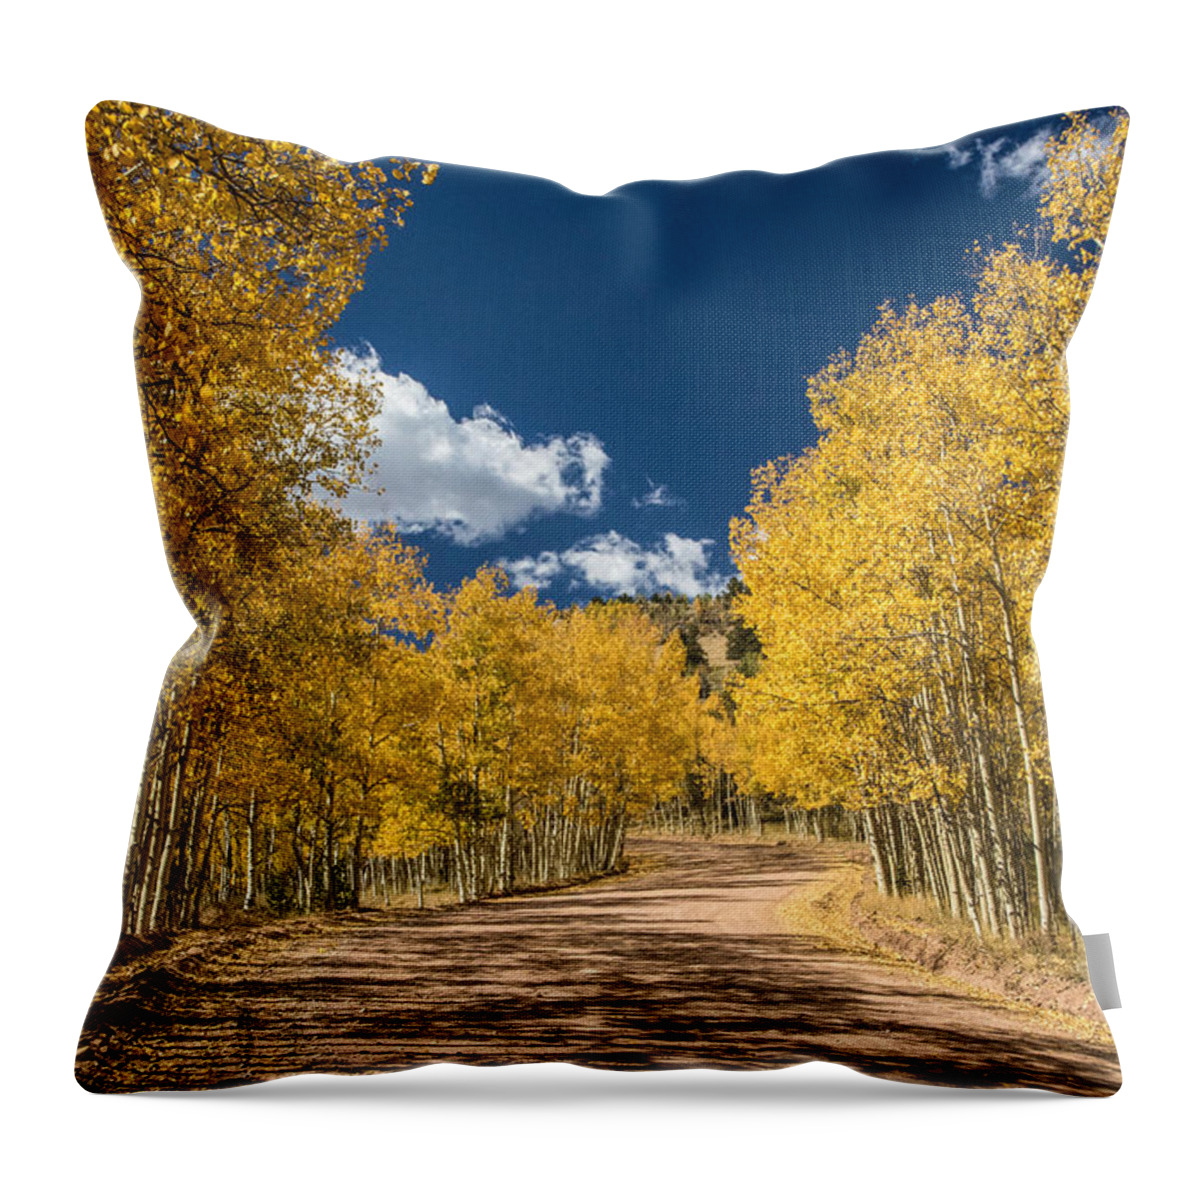 Colorado Throw Pillow featuring the photograph Gold Camp Road by Dawn Key